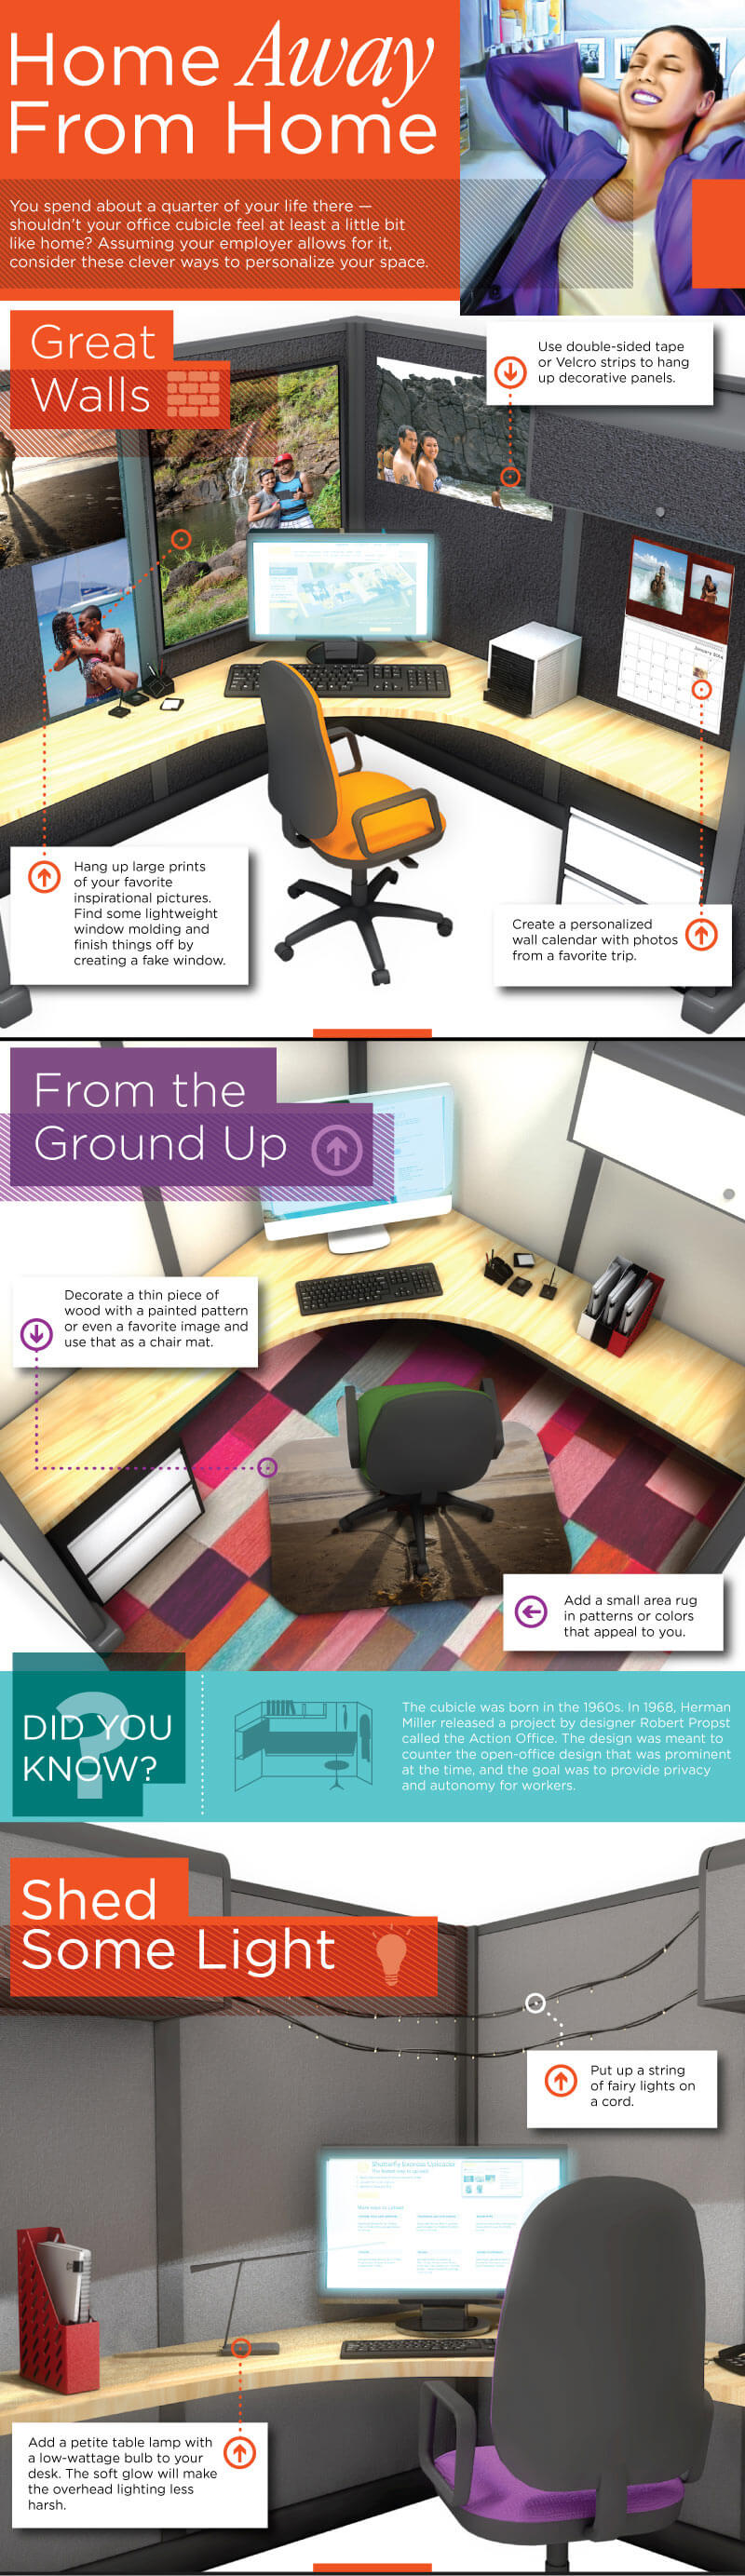  How to Decorate an Office